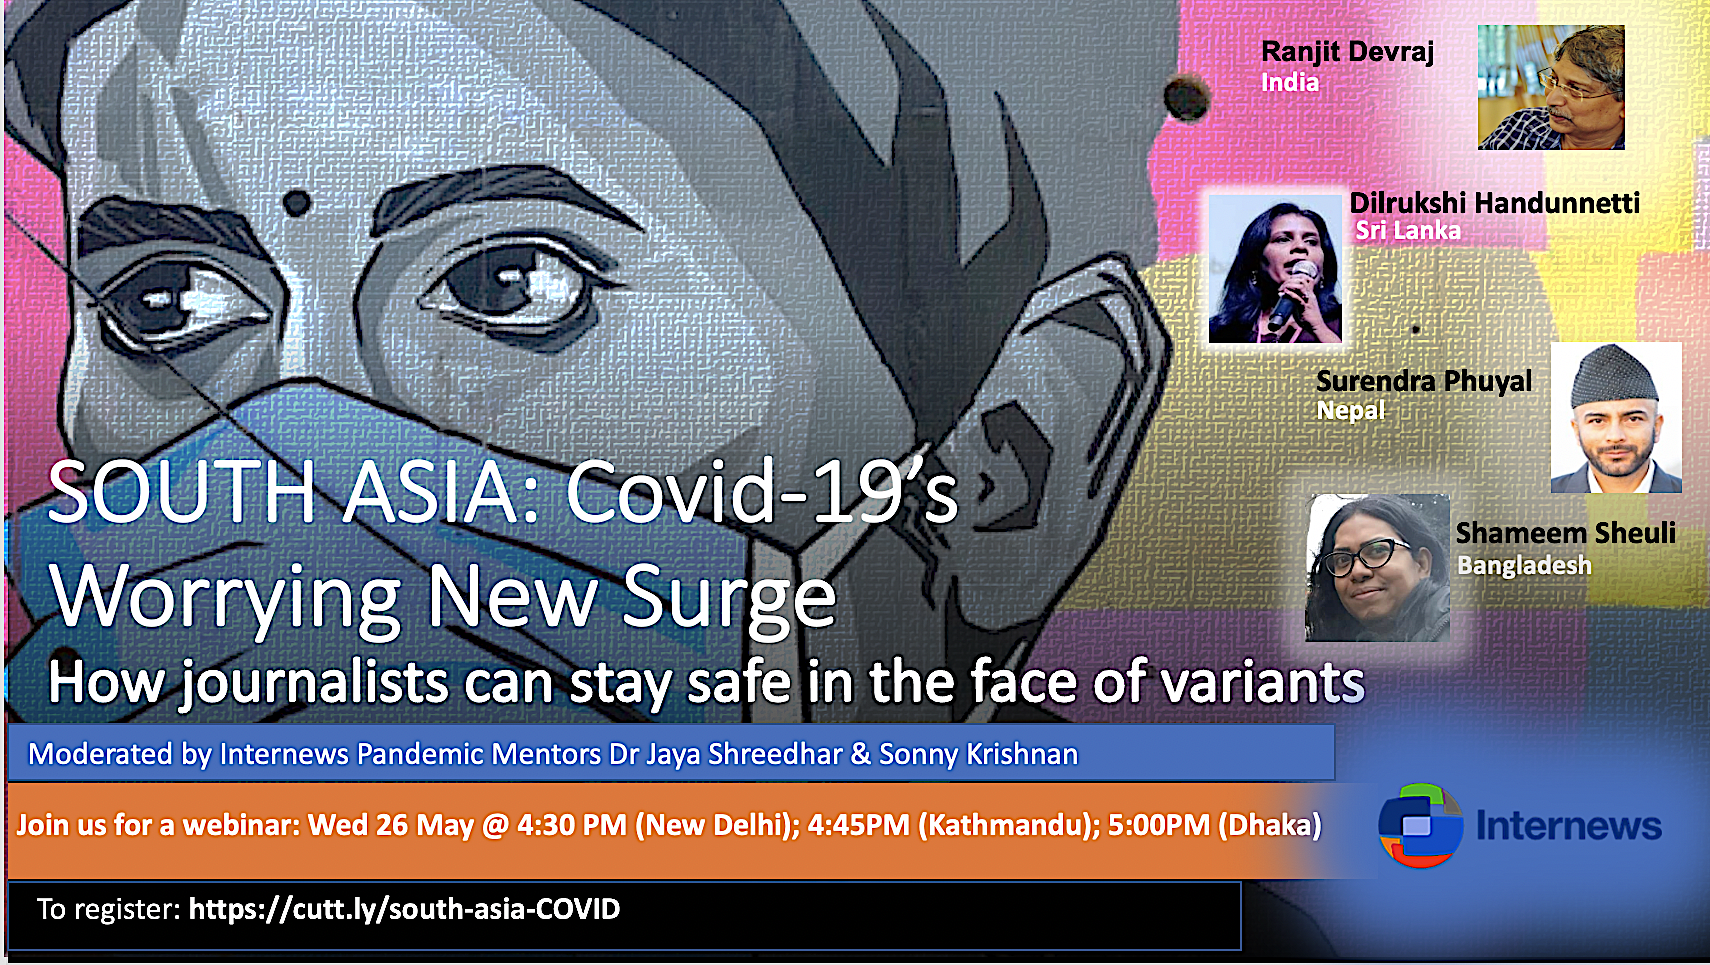 SOUTH ASIA COVID-19’s Worrying New Surge: How journalists can stay safe in the face of variants